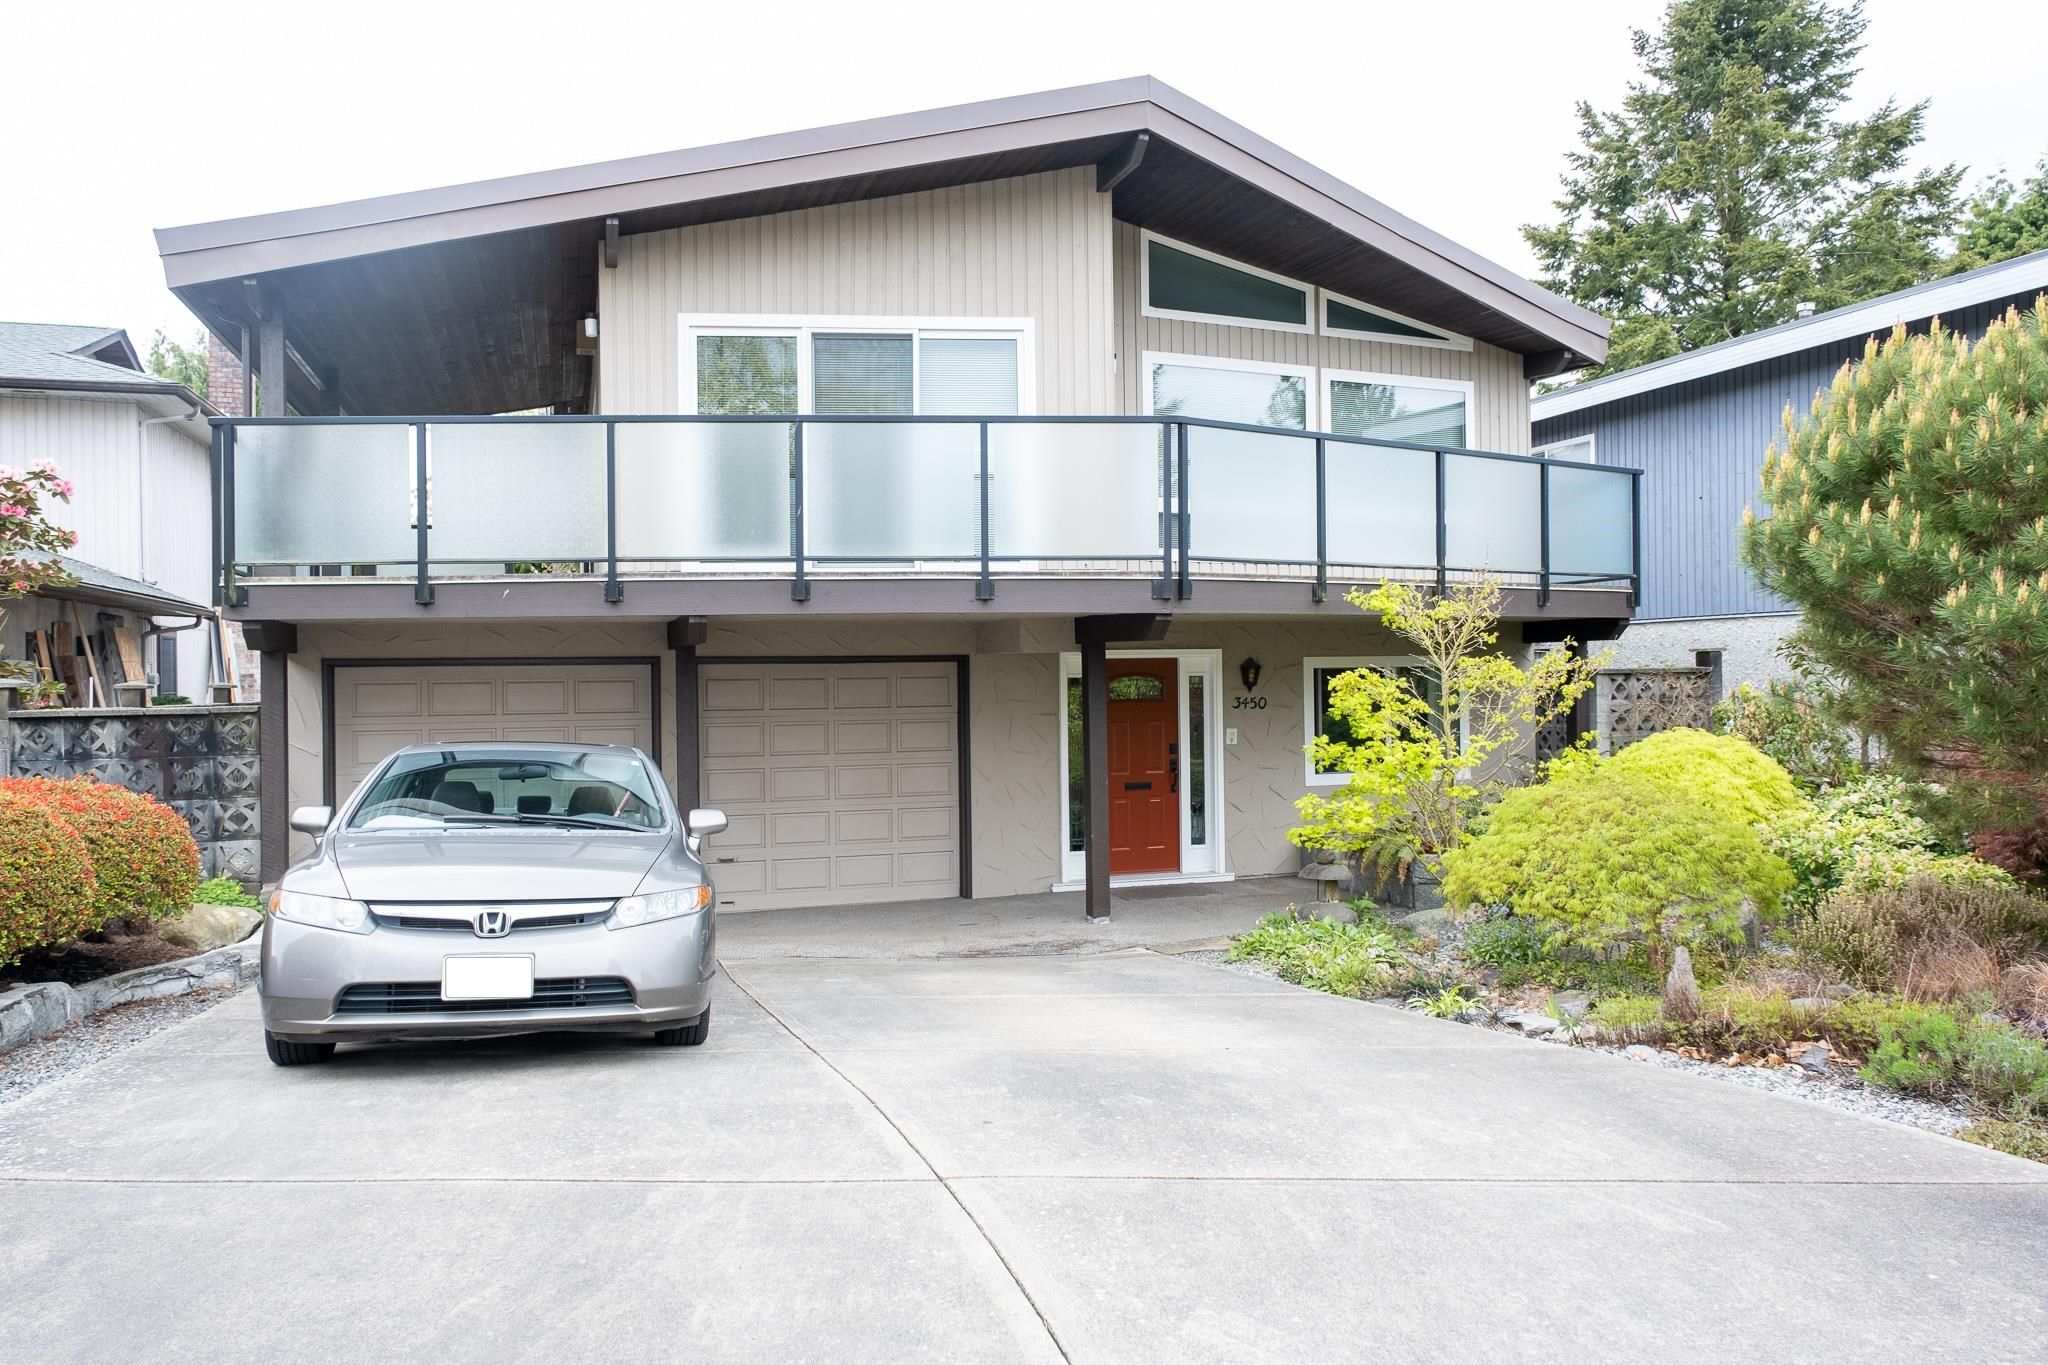 I have sold a property at 3450 51ST AVE E in Vancouver